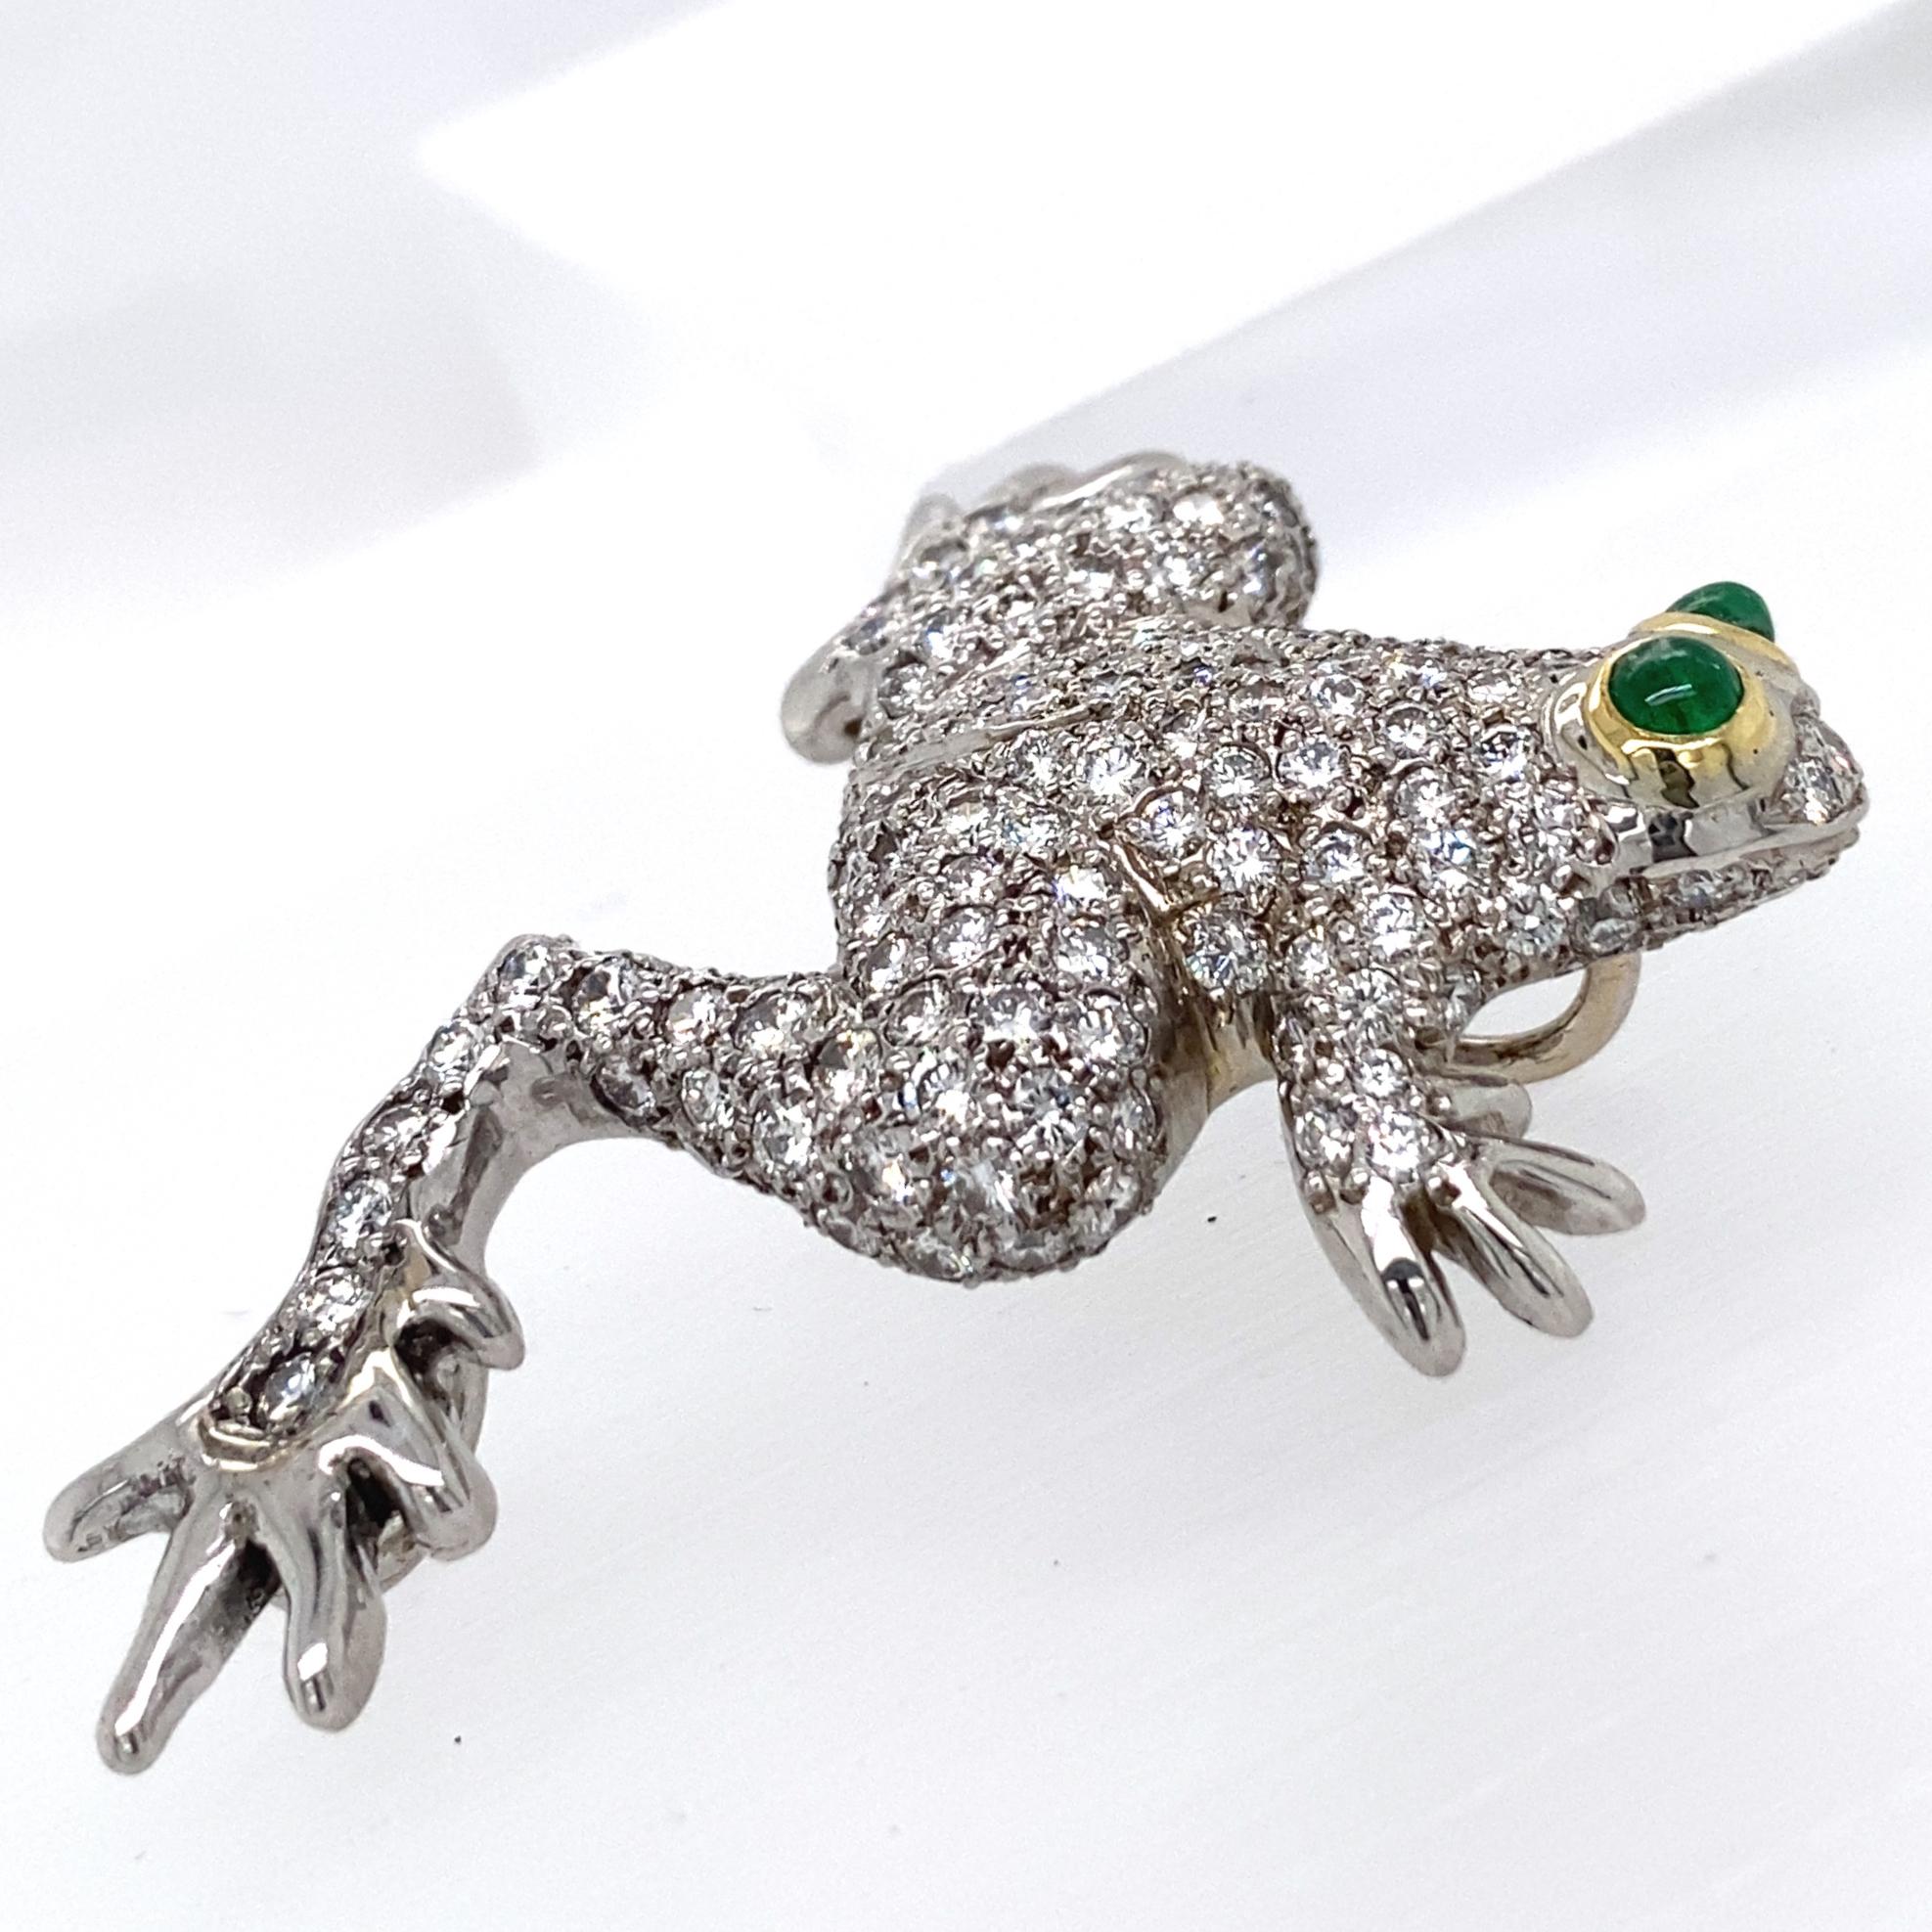 2.5 Carat Pavé Diamond Frog Pendant in White Gold on Chrome Diopside Bead Chain For Sale 1